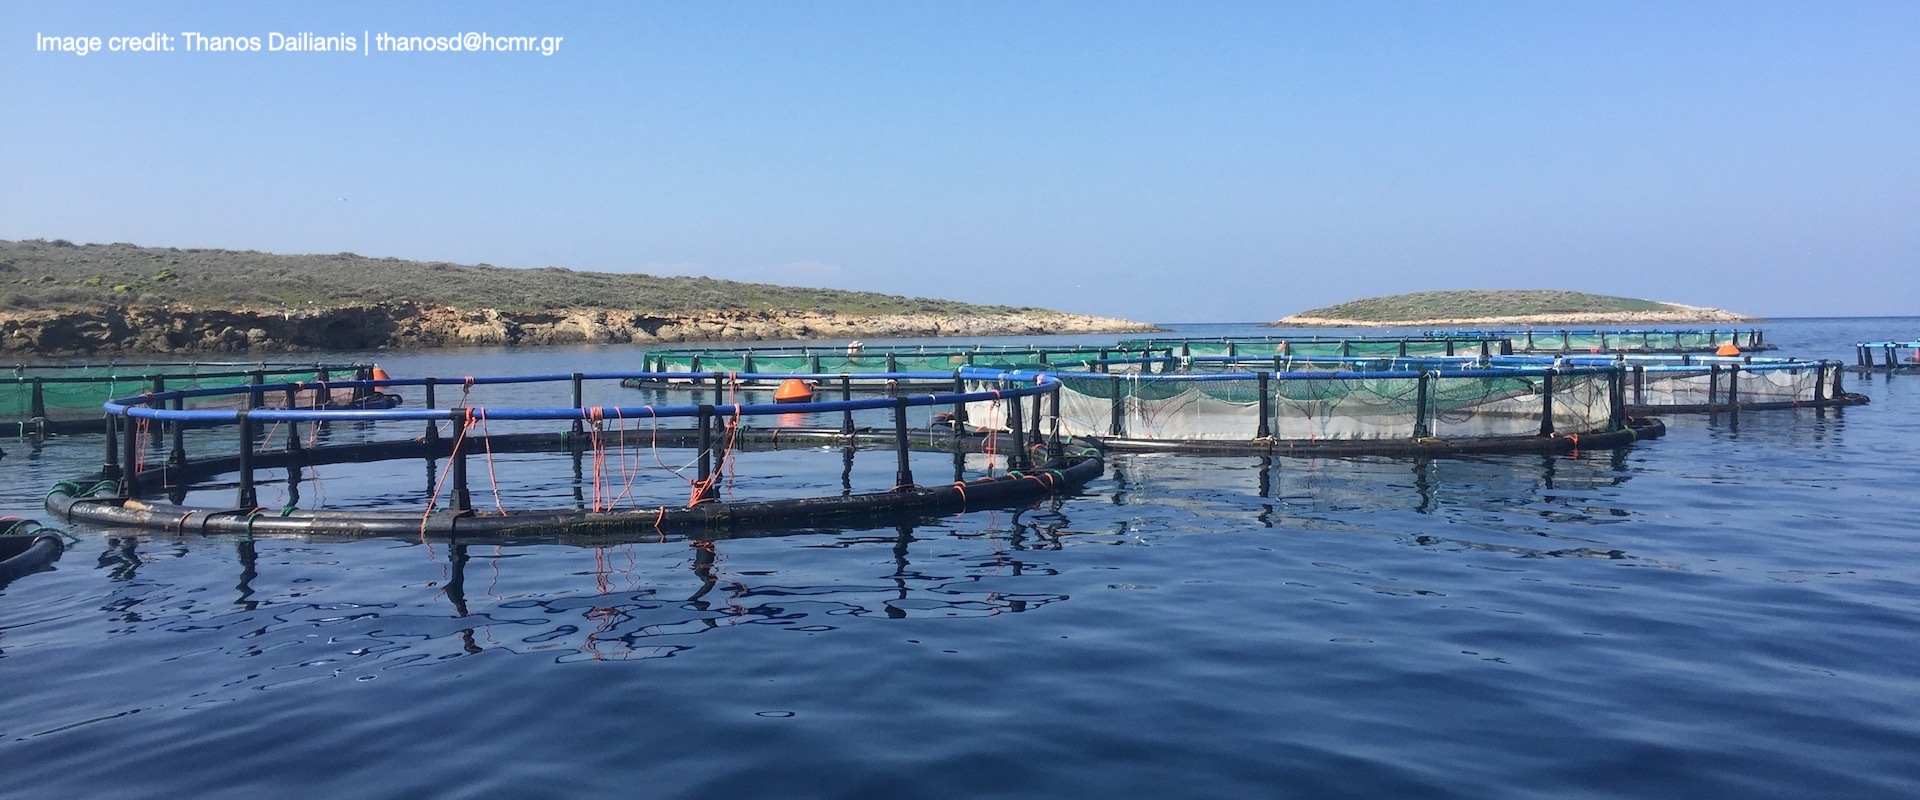 Fish farming in Greece is an expanding and highly profitable sector with an annual revenue of €621 million.